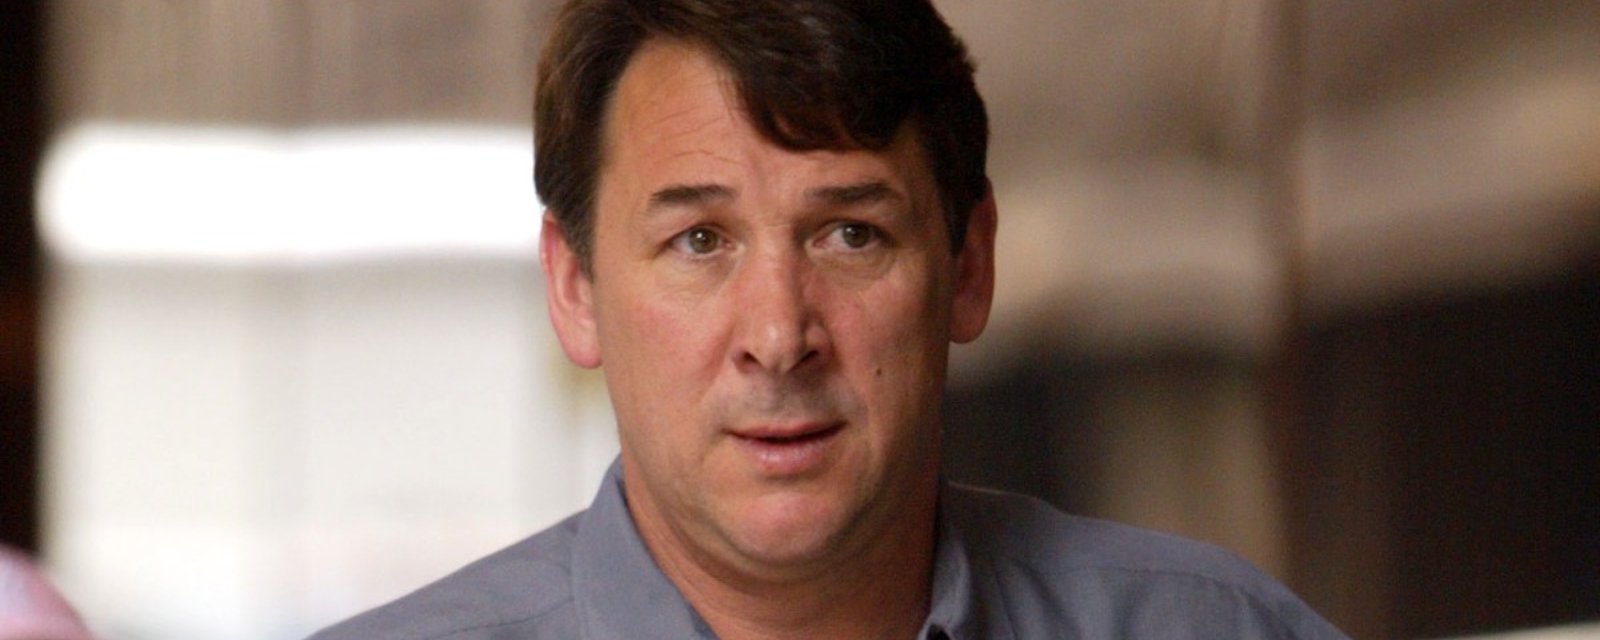 Update: Mike Milbury has officially been removed from the bubble.